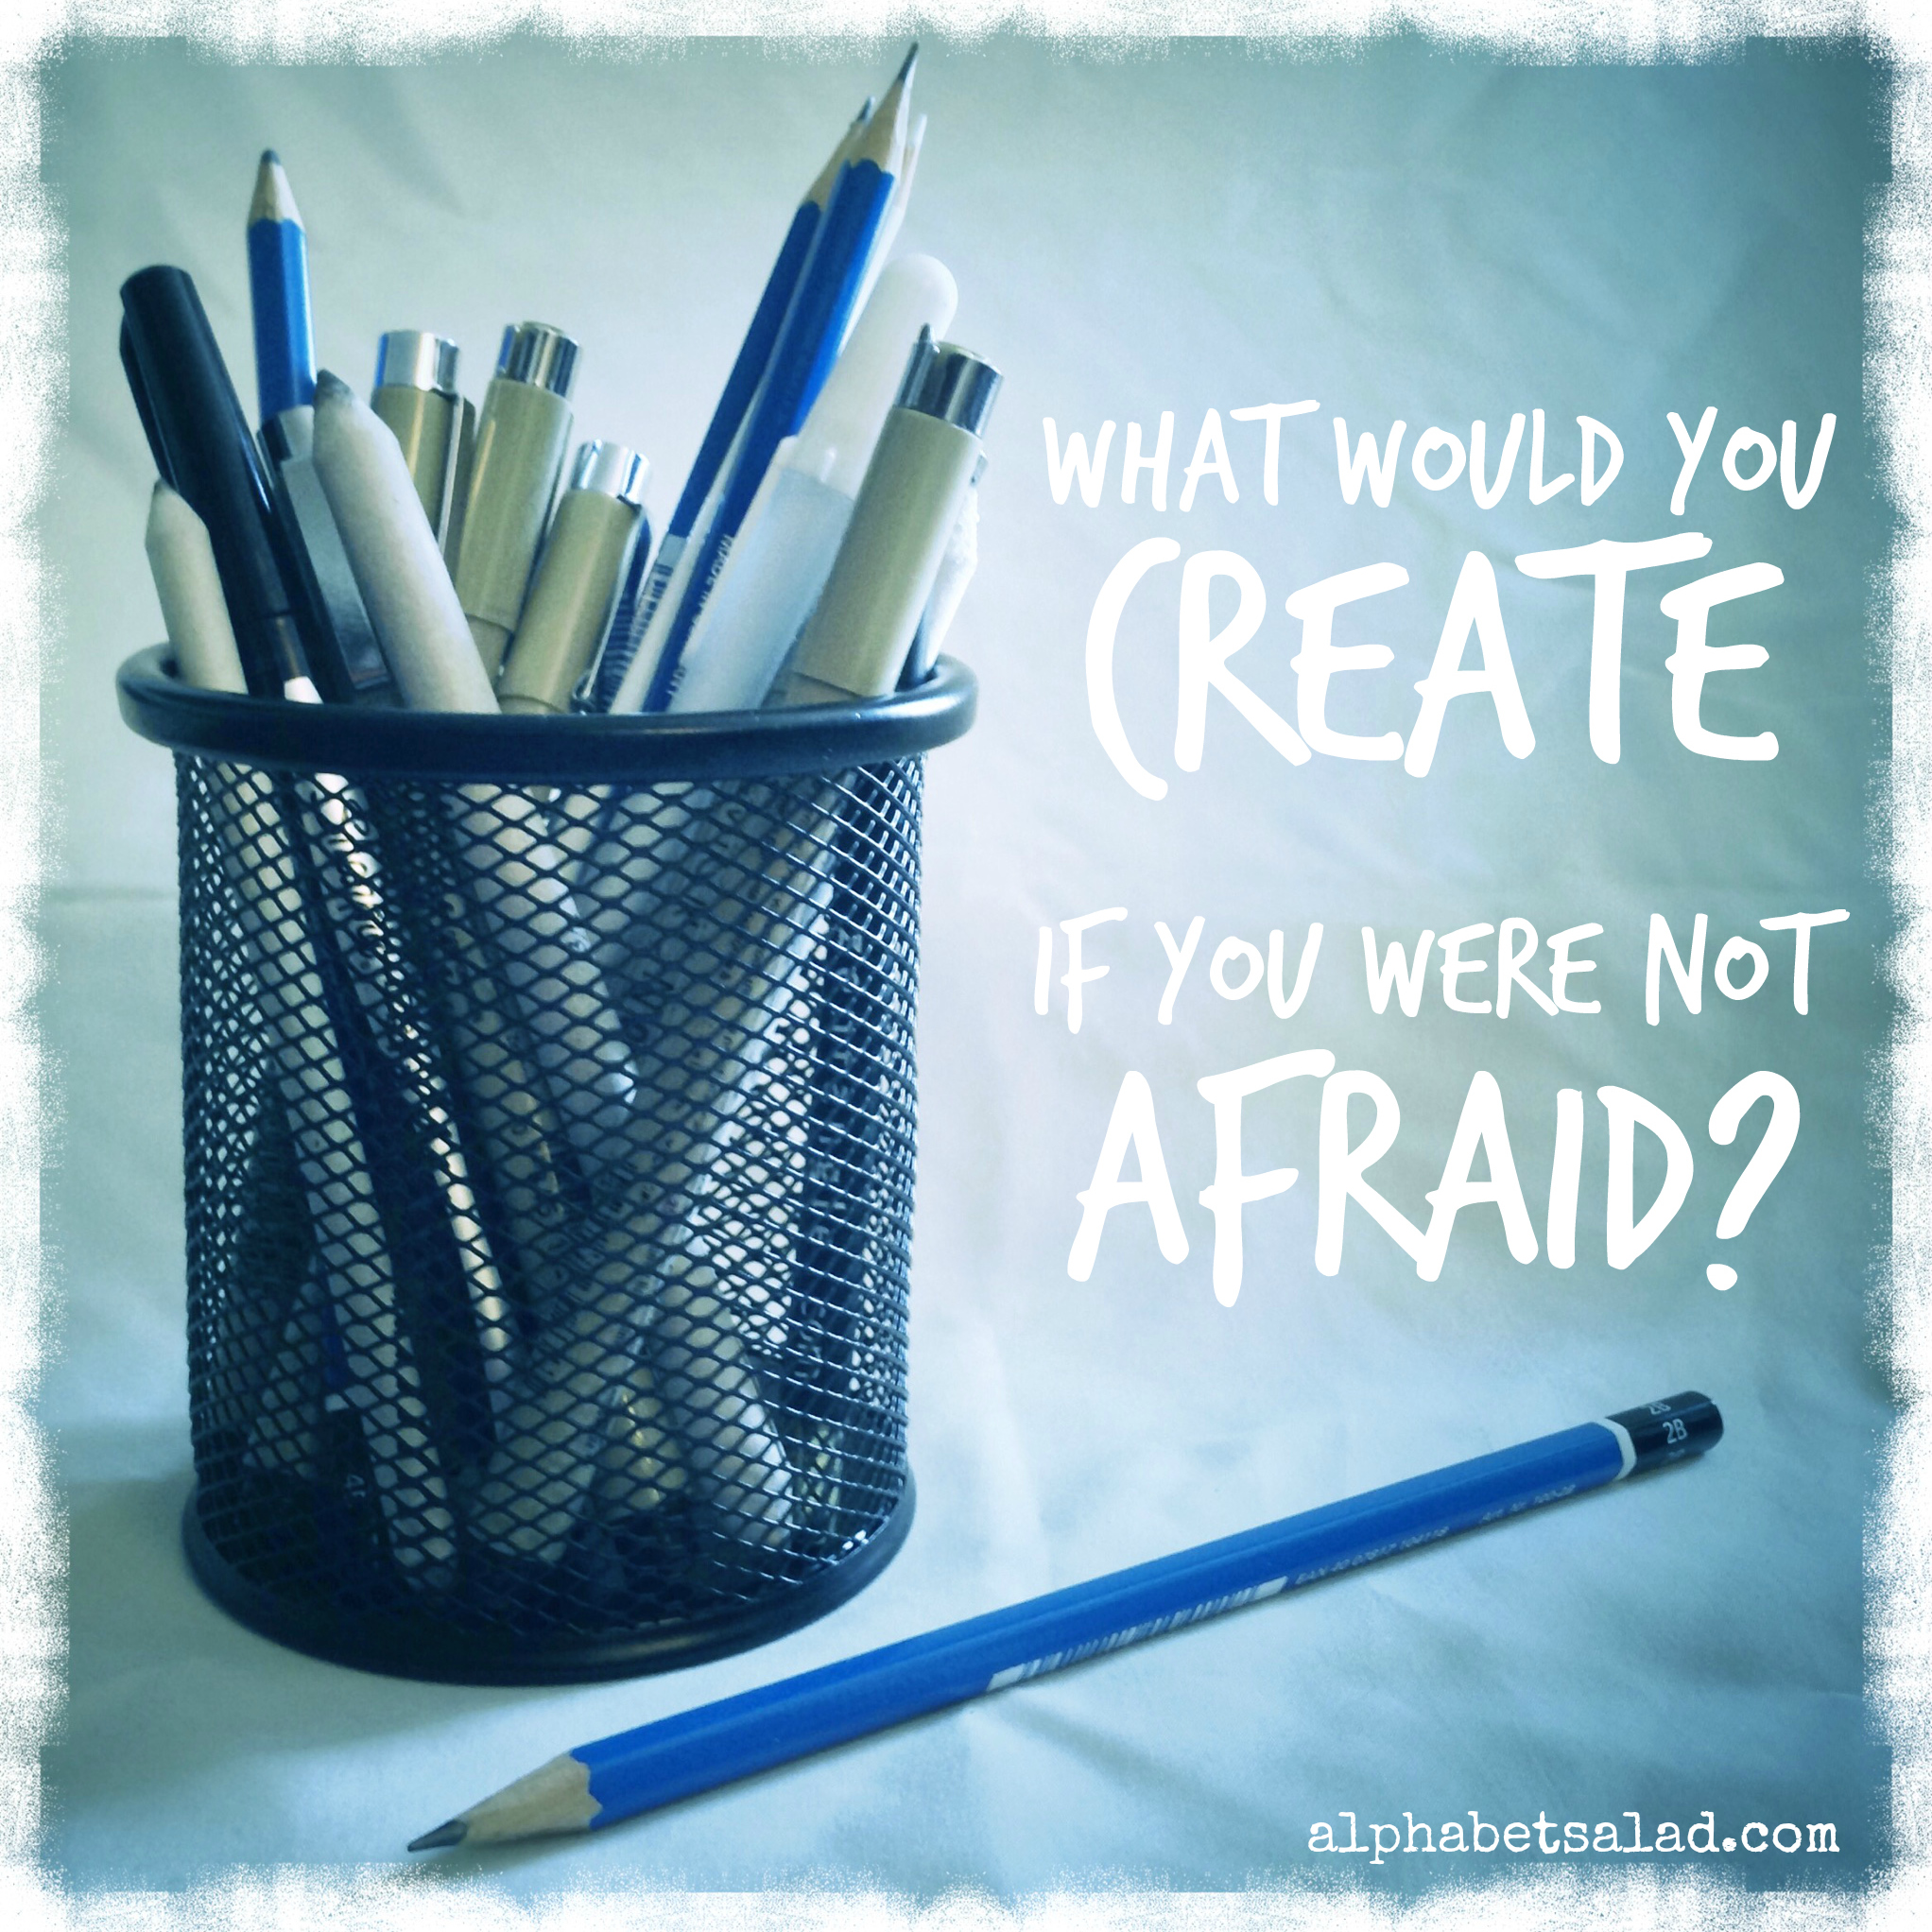 What would you create if you were not afraid?